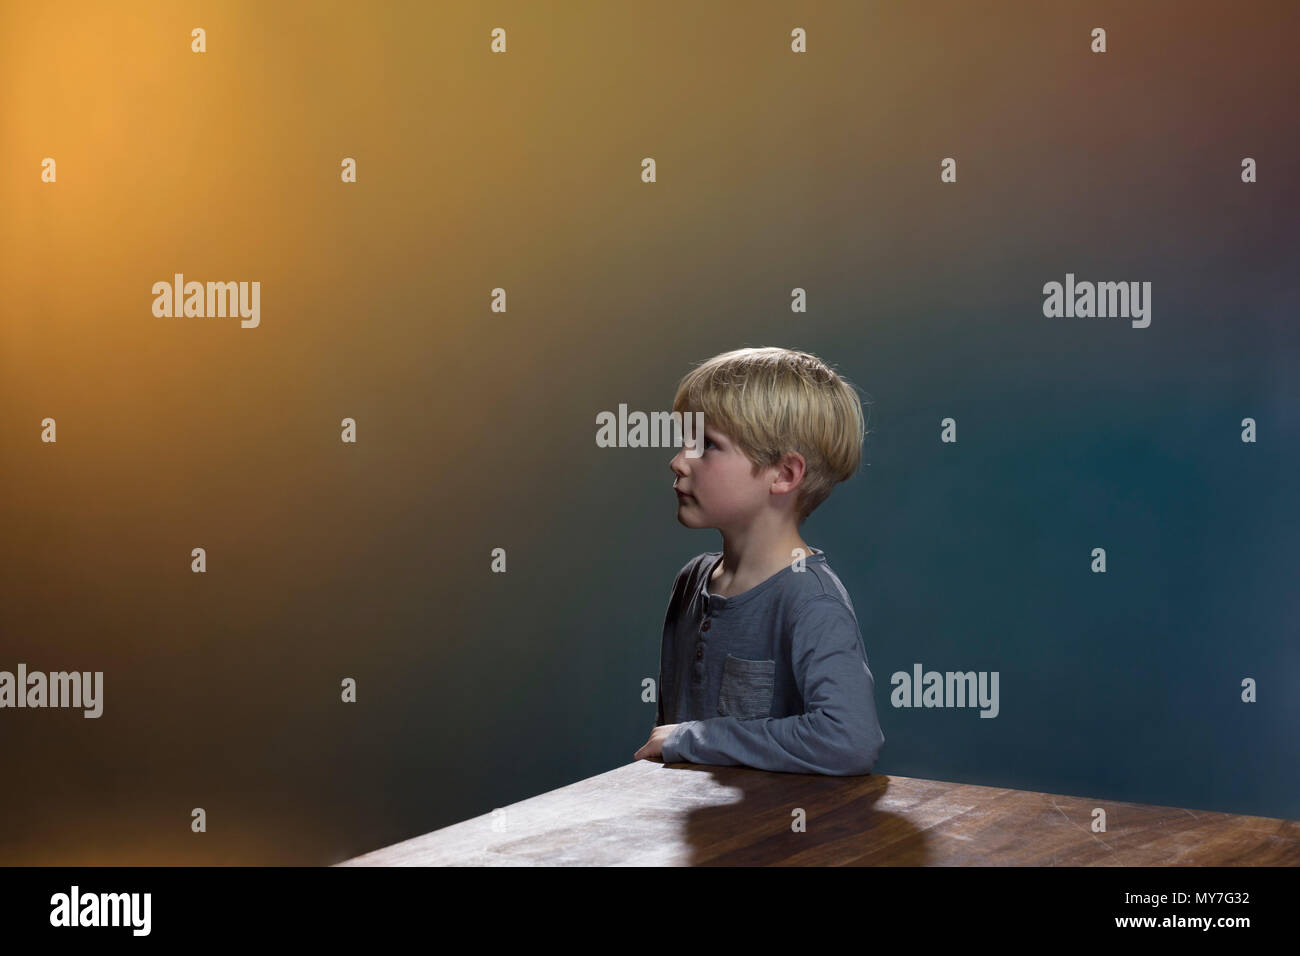 Boy at table, gold and blue background Stock Photo